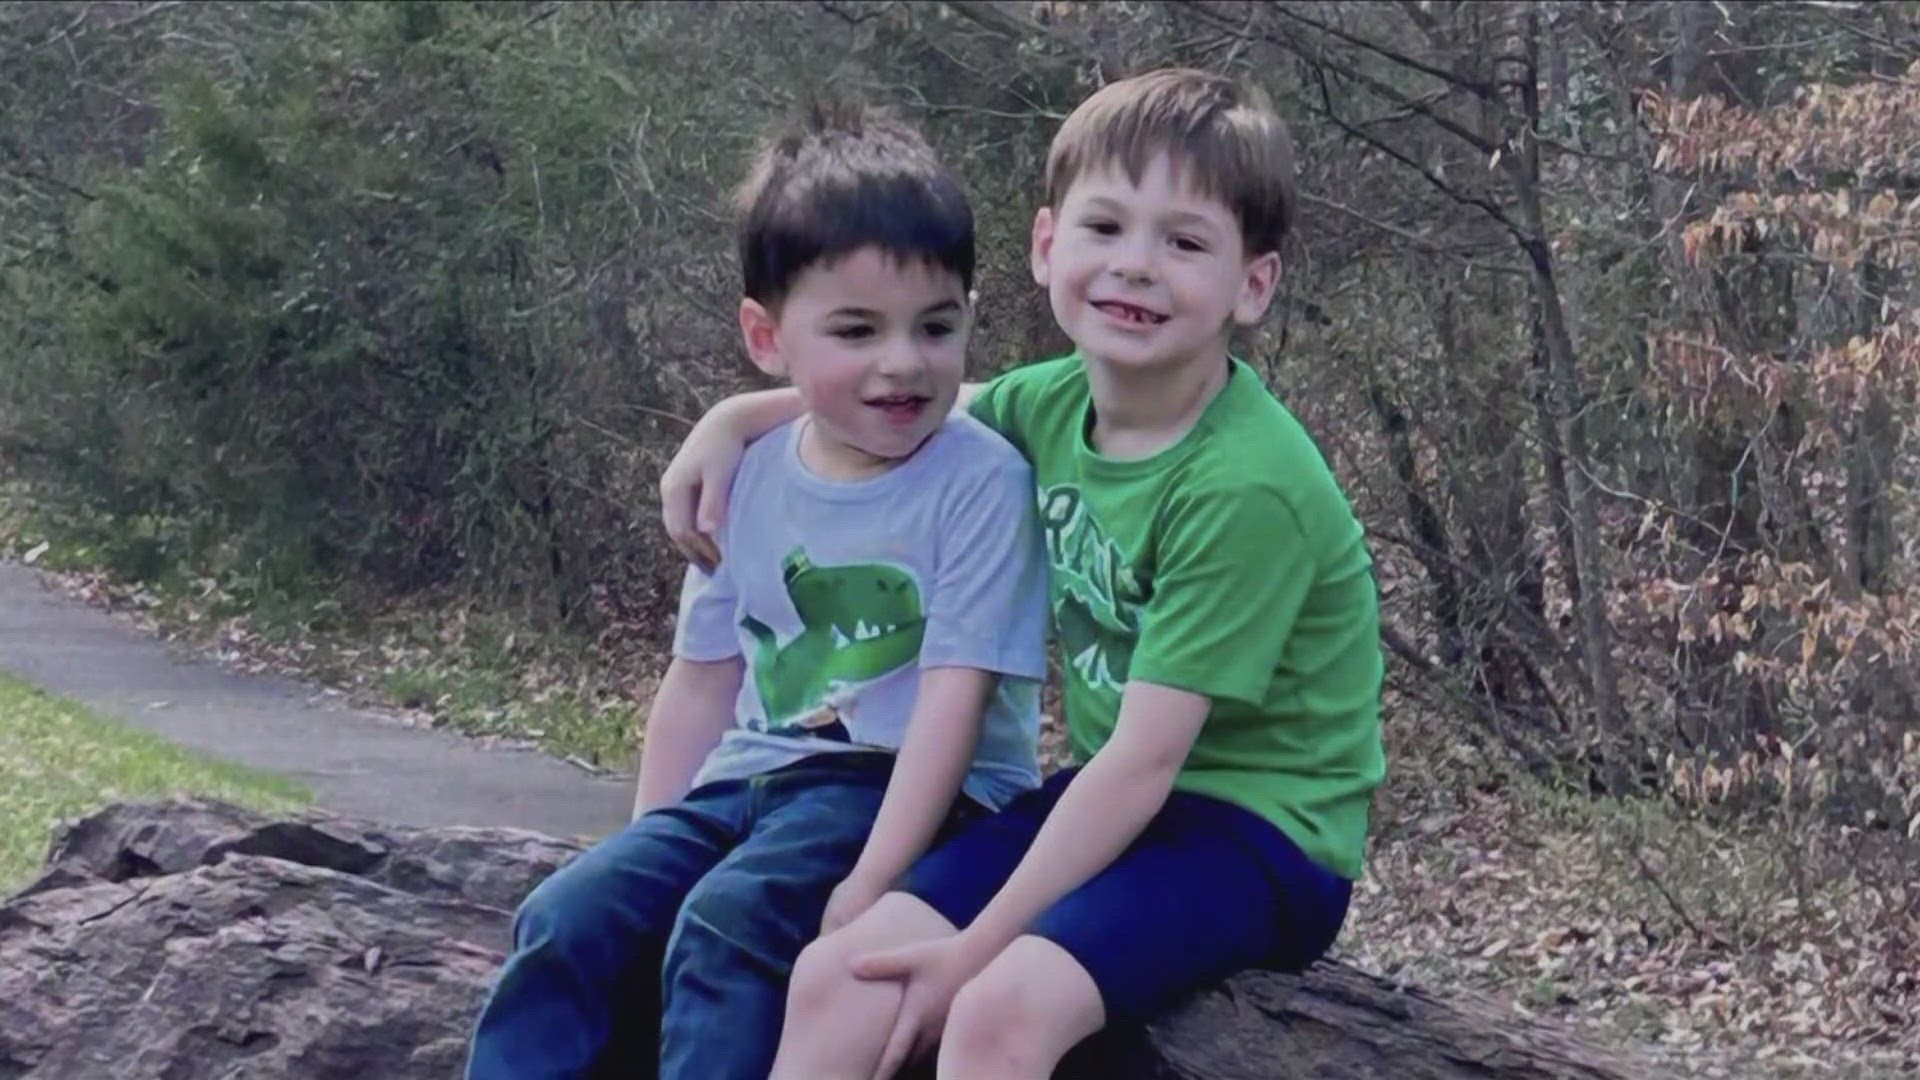 Two young boys who were pulled from a house fire in Fairfax County last week have died, according to a social media post by the boys' father.